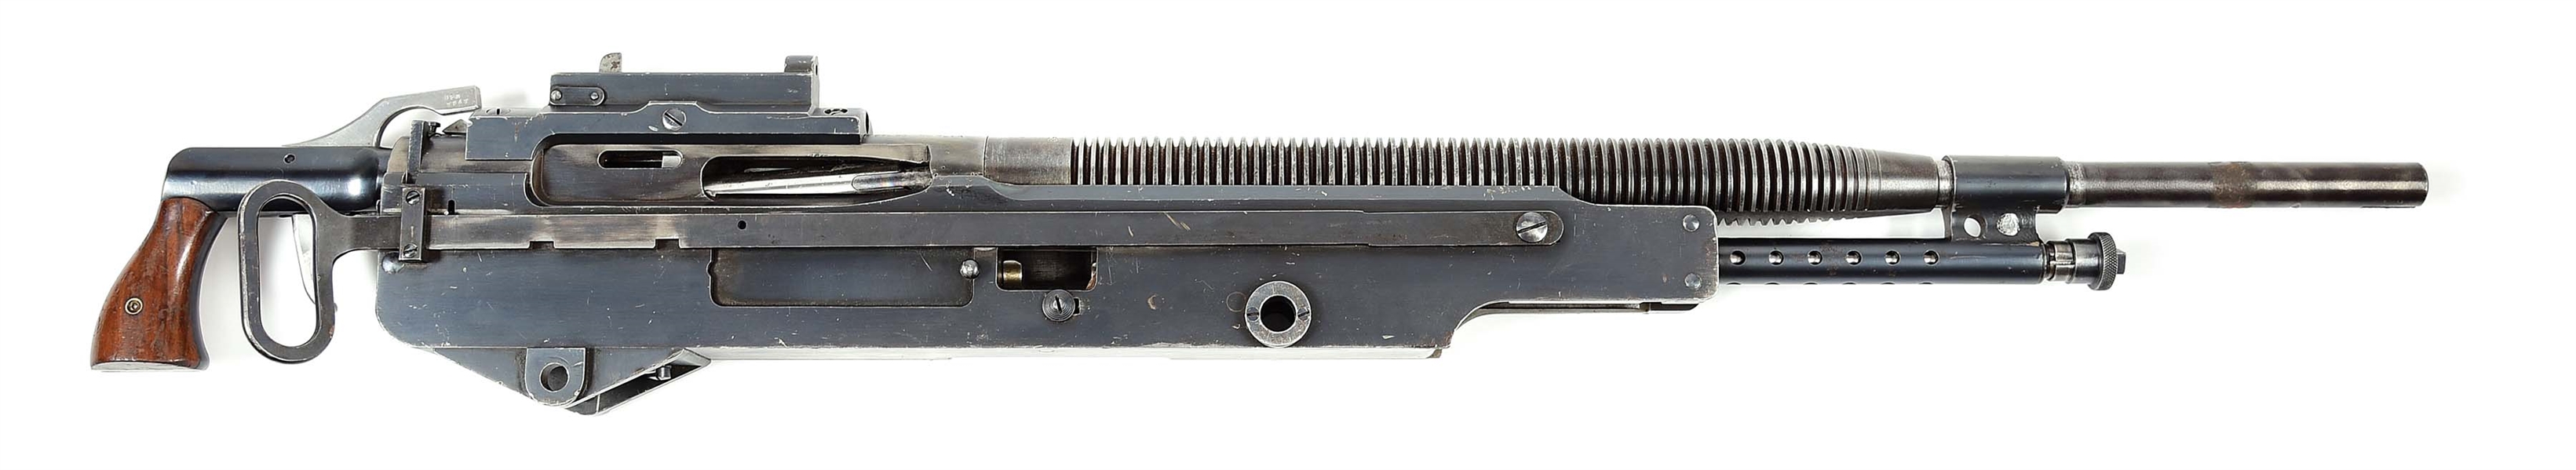 (N) MARLIN ROCKWELL MODEL 1917 “DIGGER” U.S. NAVY MACHINE GUN WITH SIDE COCKING CHARGING HANDLE (CURIO & RELIC).